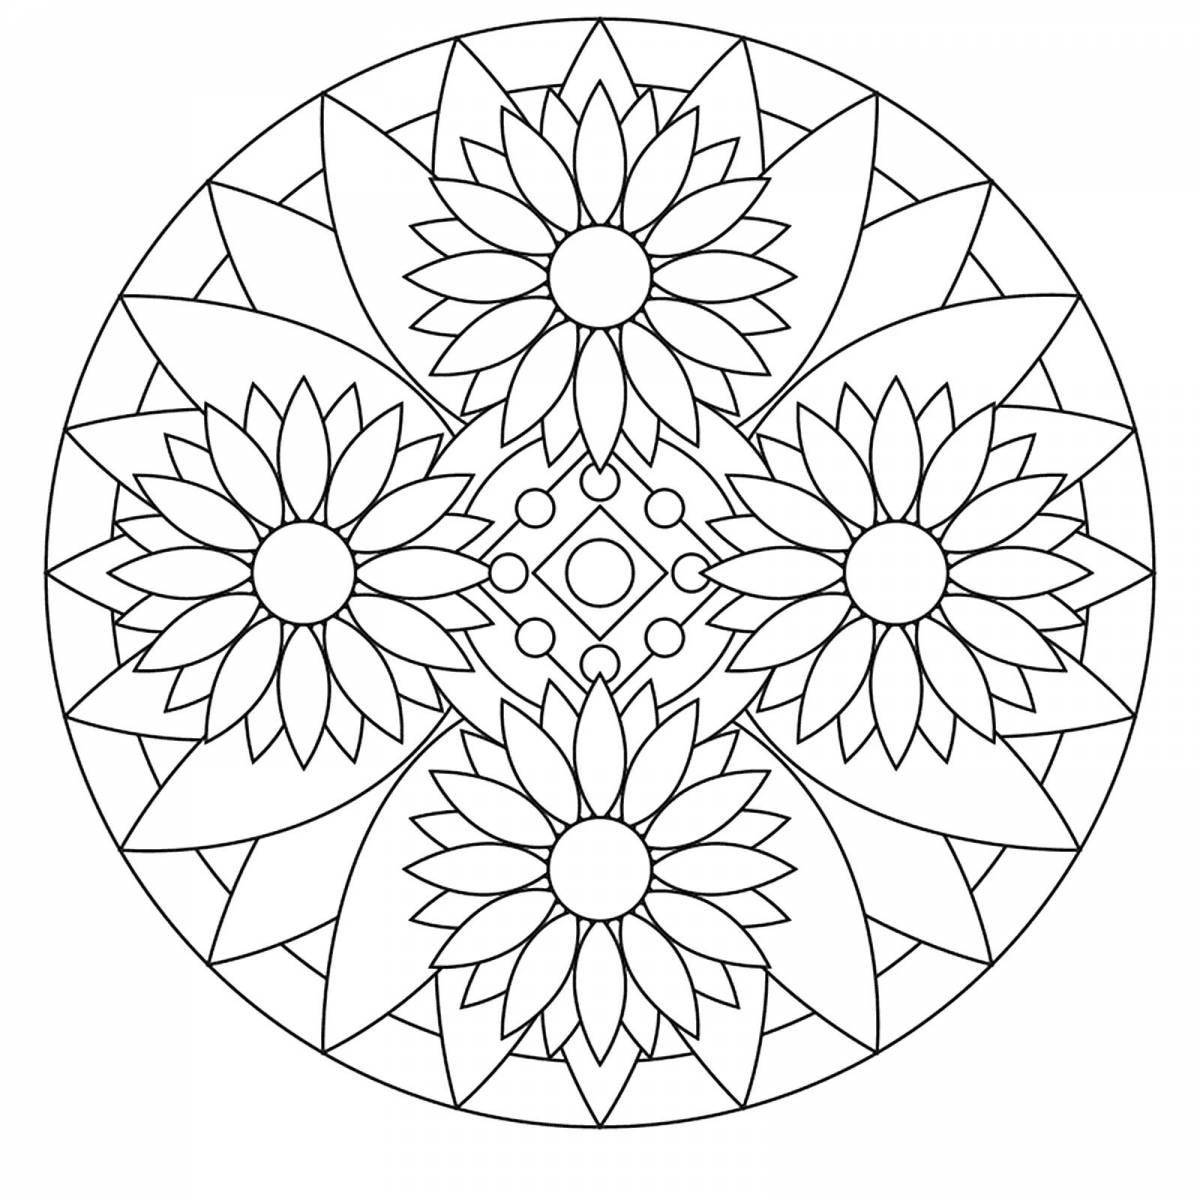 Coloring page with an attractive circular pattern